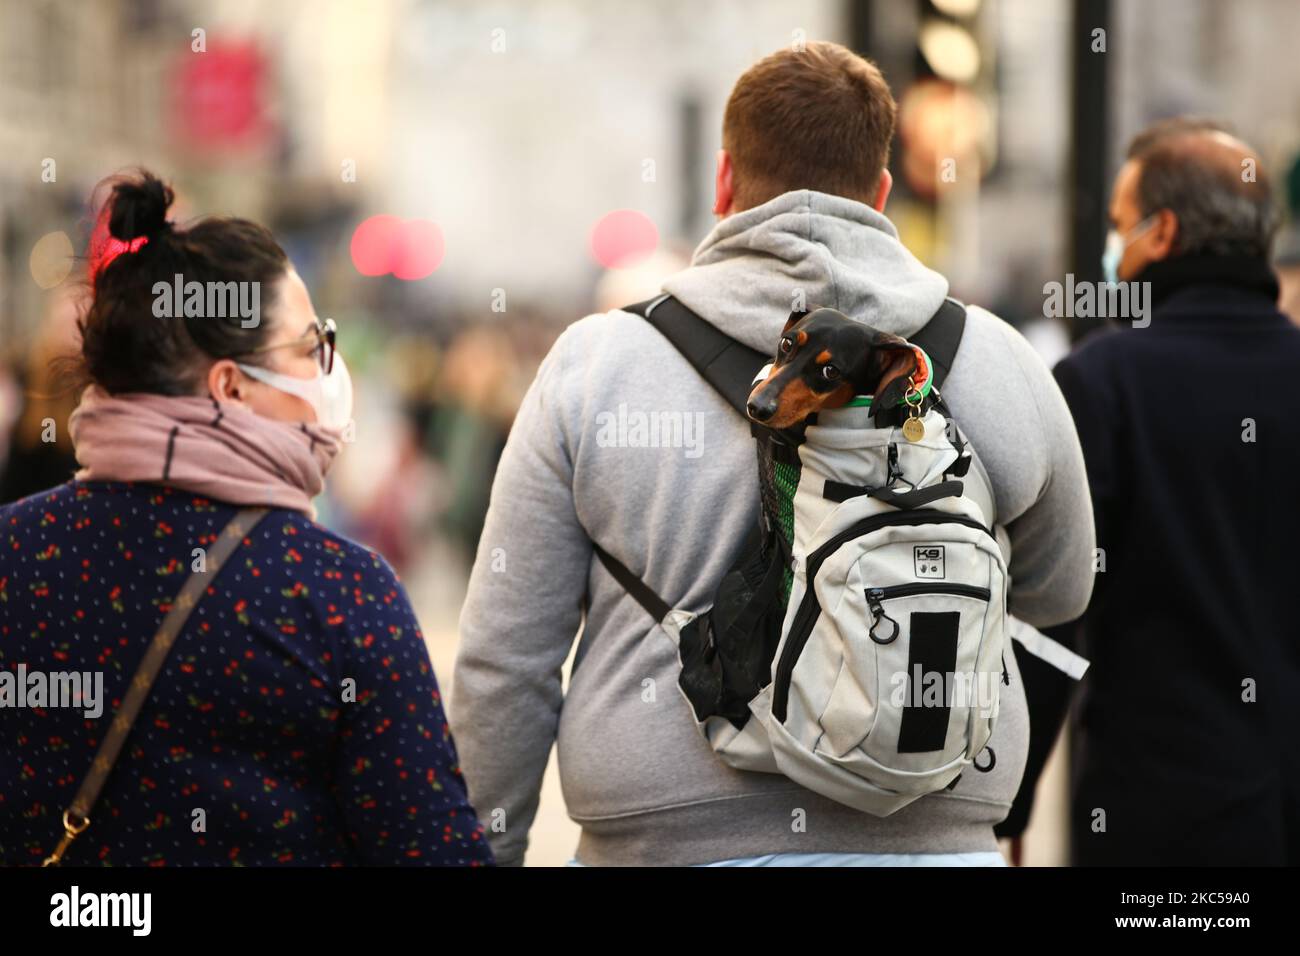 A dog being carried in a backpack looks backwards on a temporarily-pedestrianised Regent Street in London, England, on December 5, 2020. London has returned to so-called Tier 2 or 'high alert' coronavirus restrictions since the end of the four-week, England-wide lockdown last Wednesday, meaning a reopening of non-essential shops and hospitality businesses as the festive season gets underway. Rules under all three of England's tiers have been strengthened from before the November lockdown, however, with pubs and restaurants most severely impacted. In London's West End, meanwhile, Oxford Street  Stock Photo